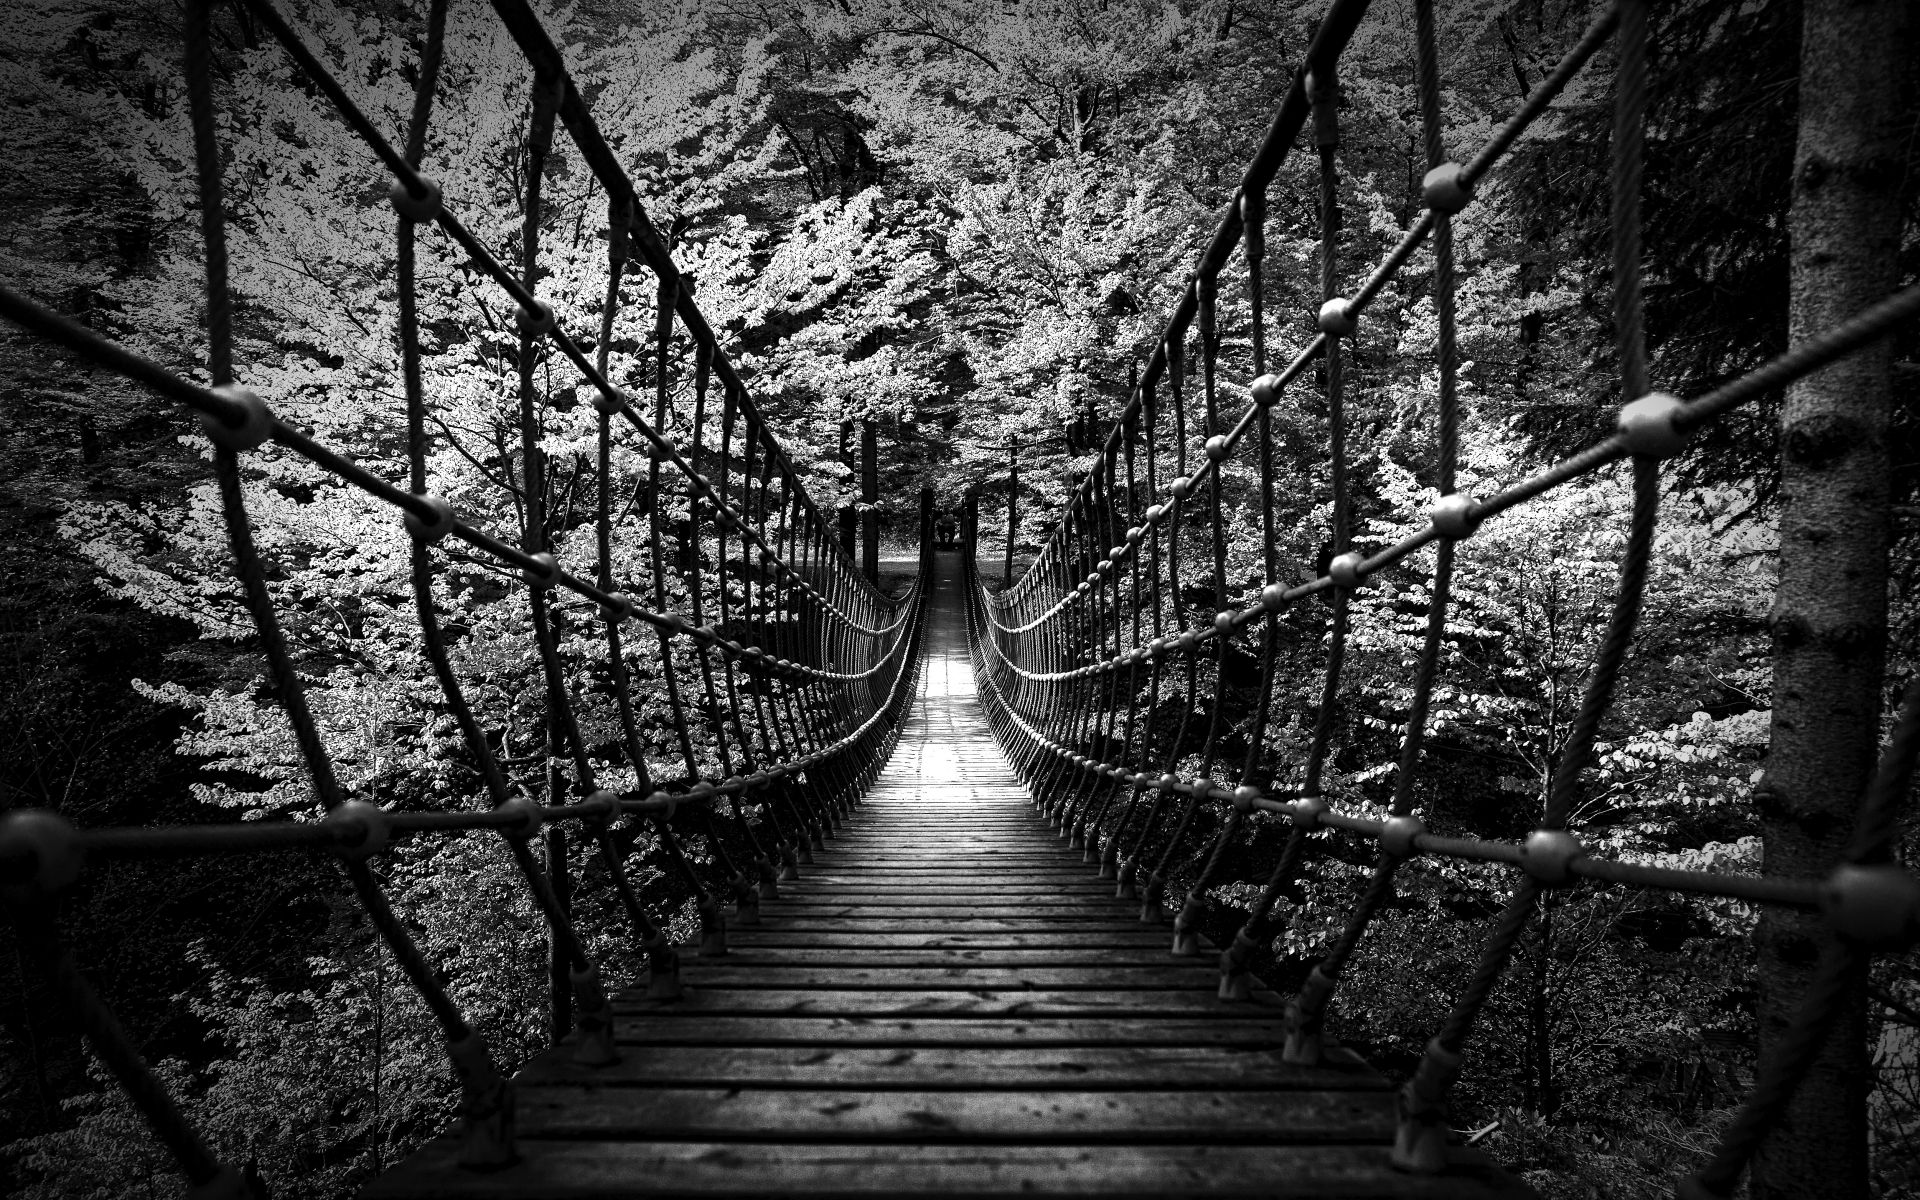 monochrome, Black, White, B w, Landscapes, Nature, Wood, Rope, Scary